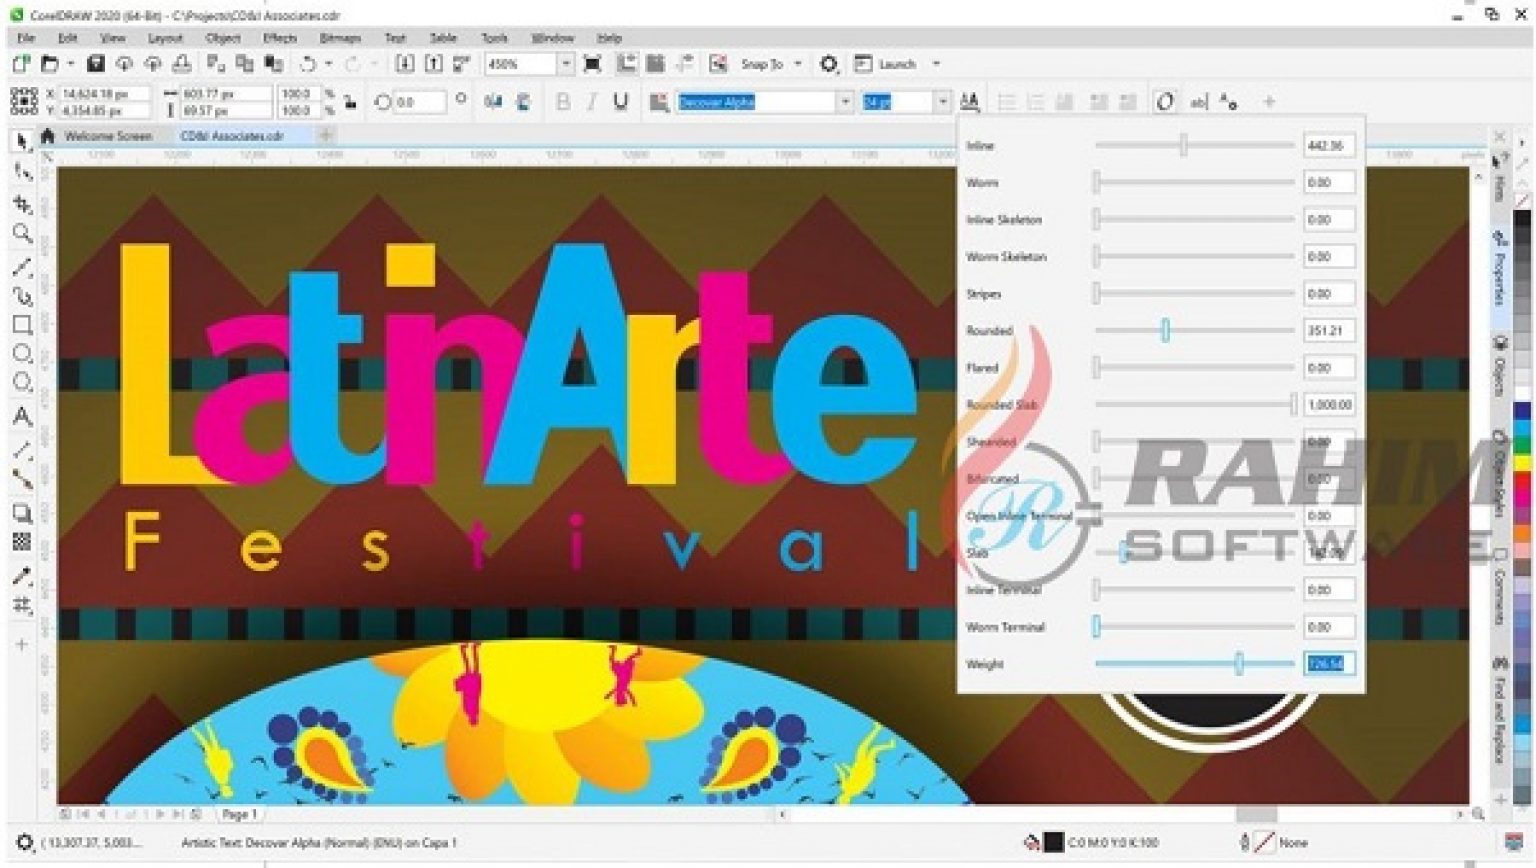 coreldraw old version free download for mac